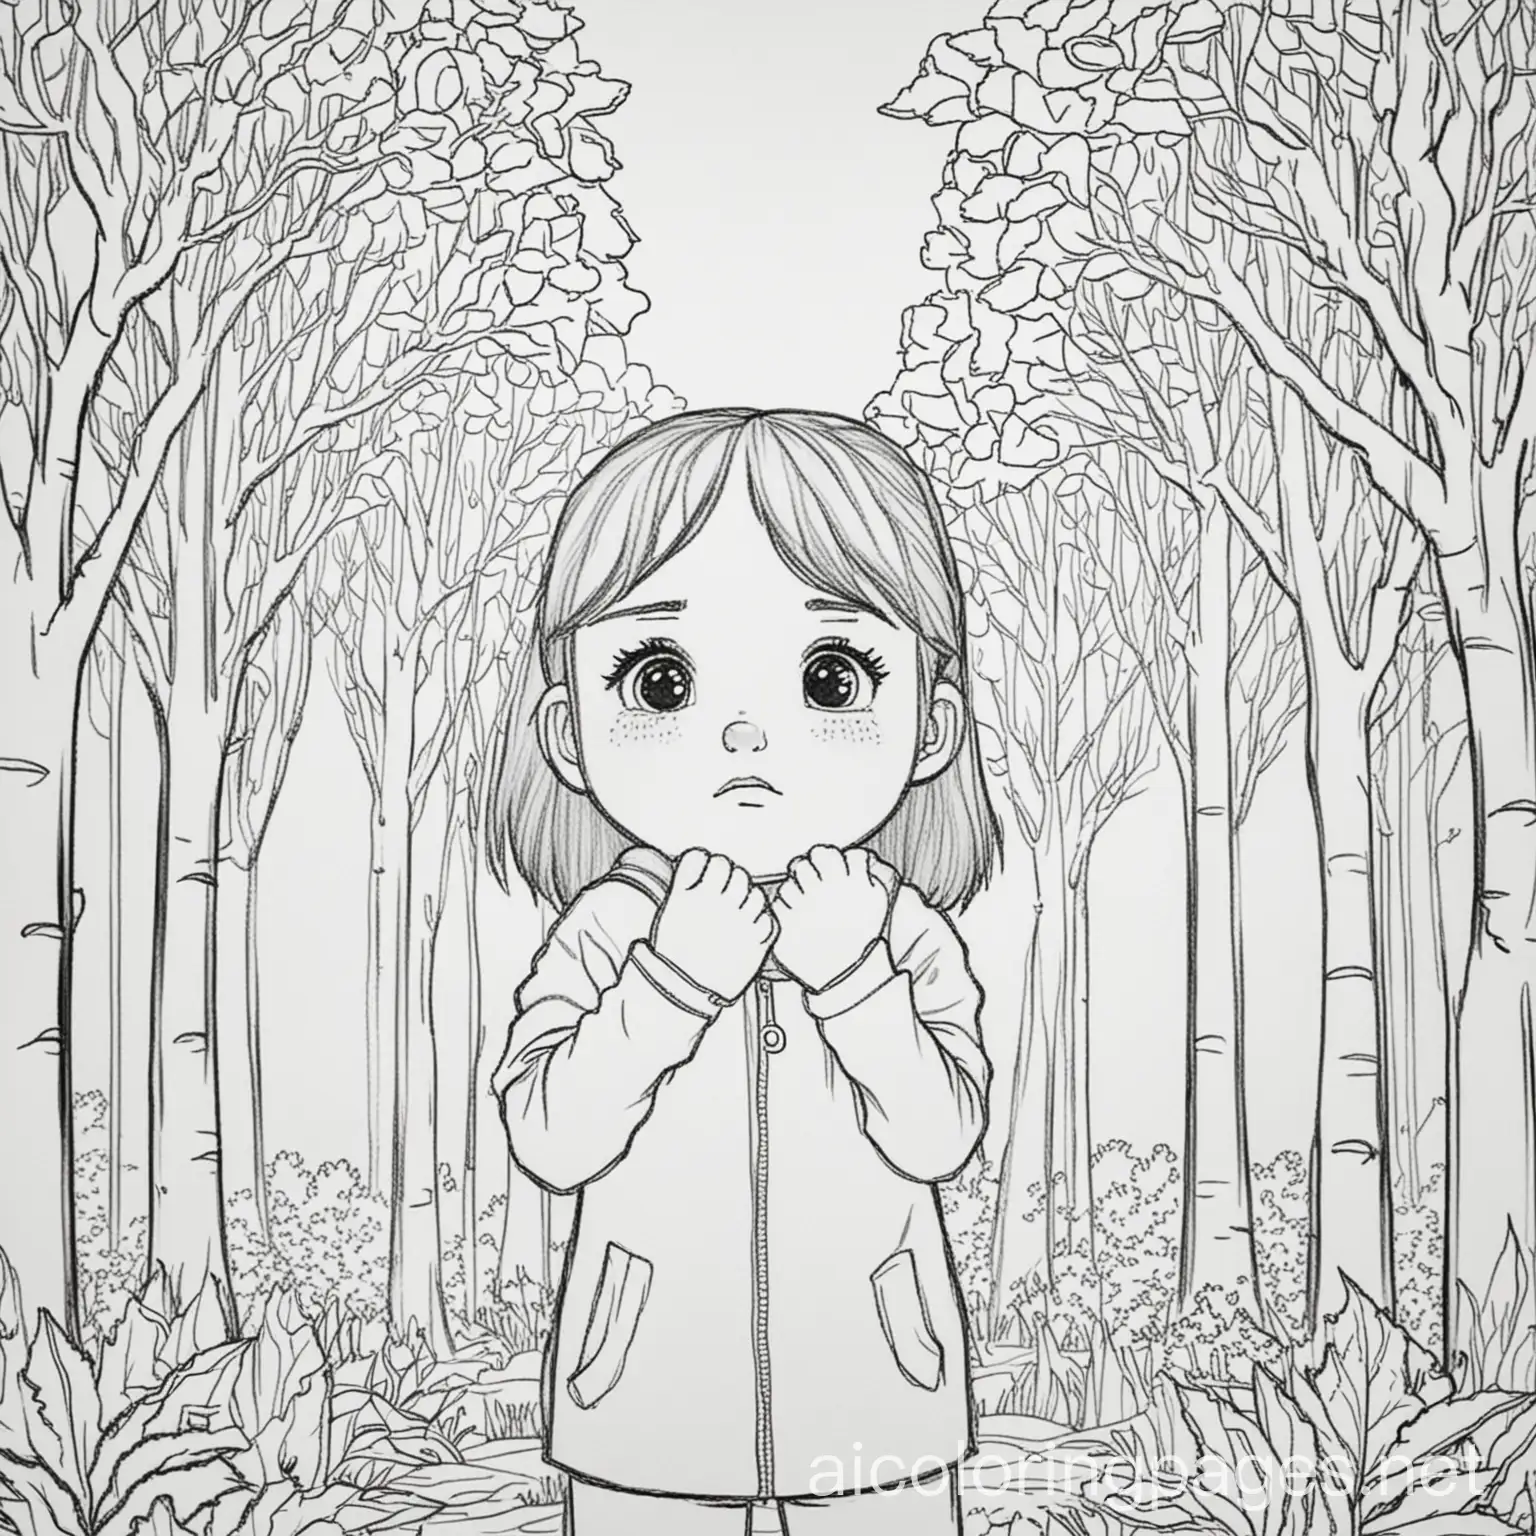 Young-Girl-Crying-with-Tree-Coloring-Page